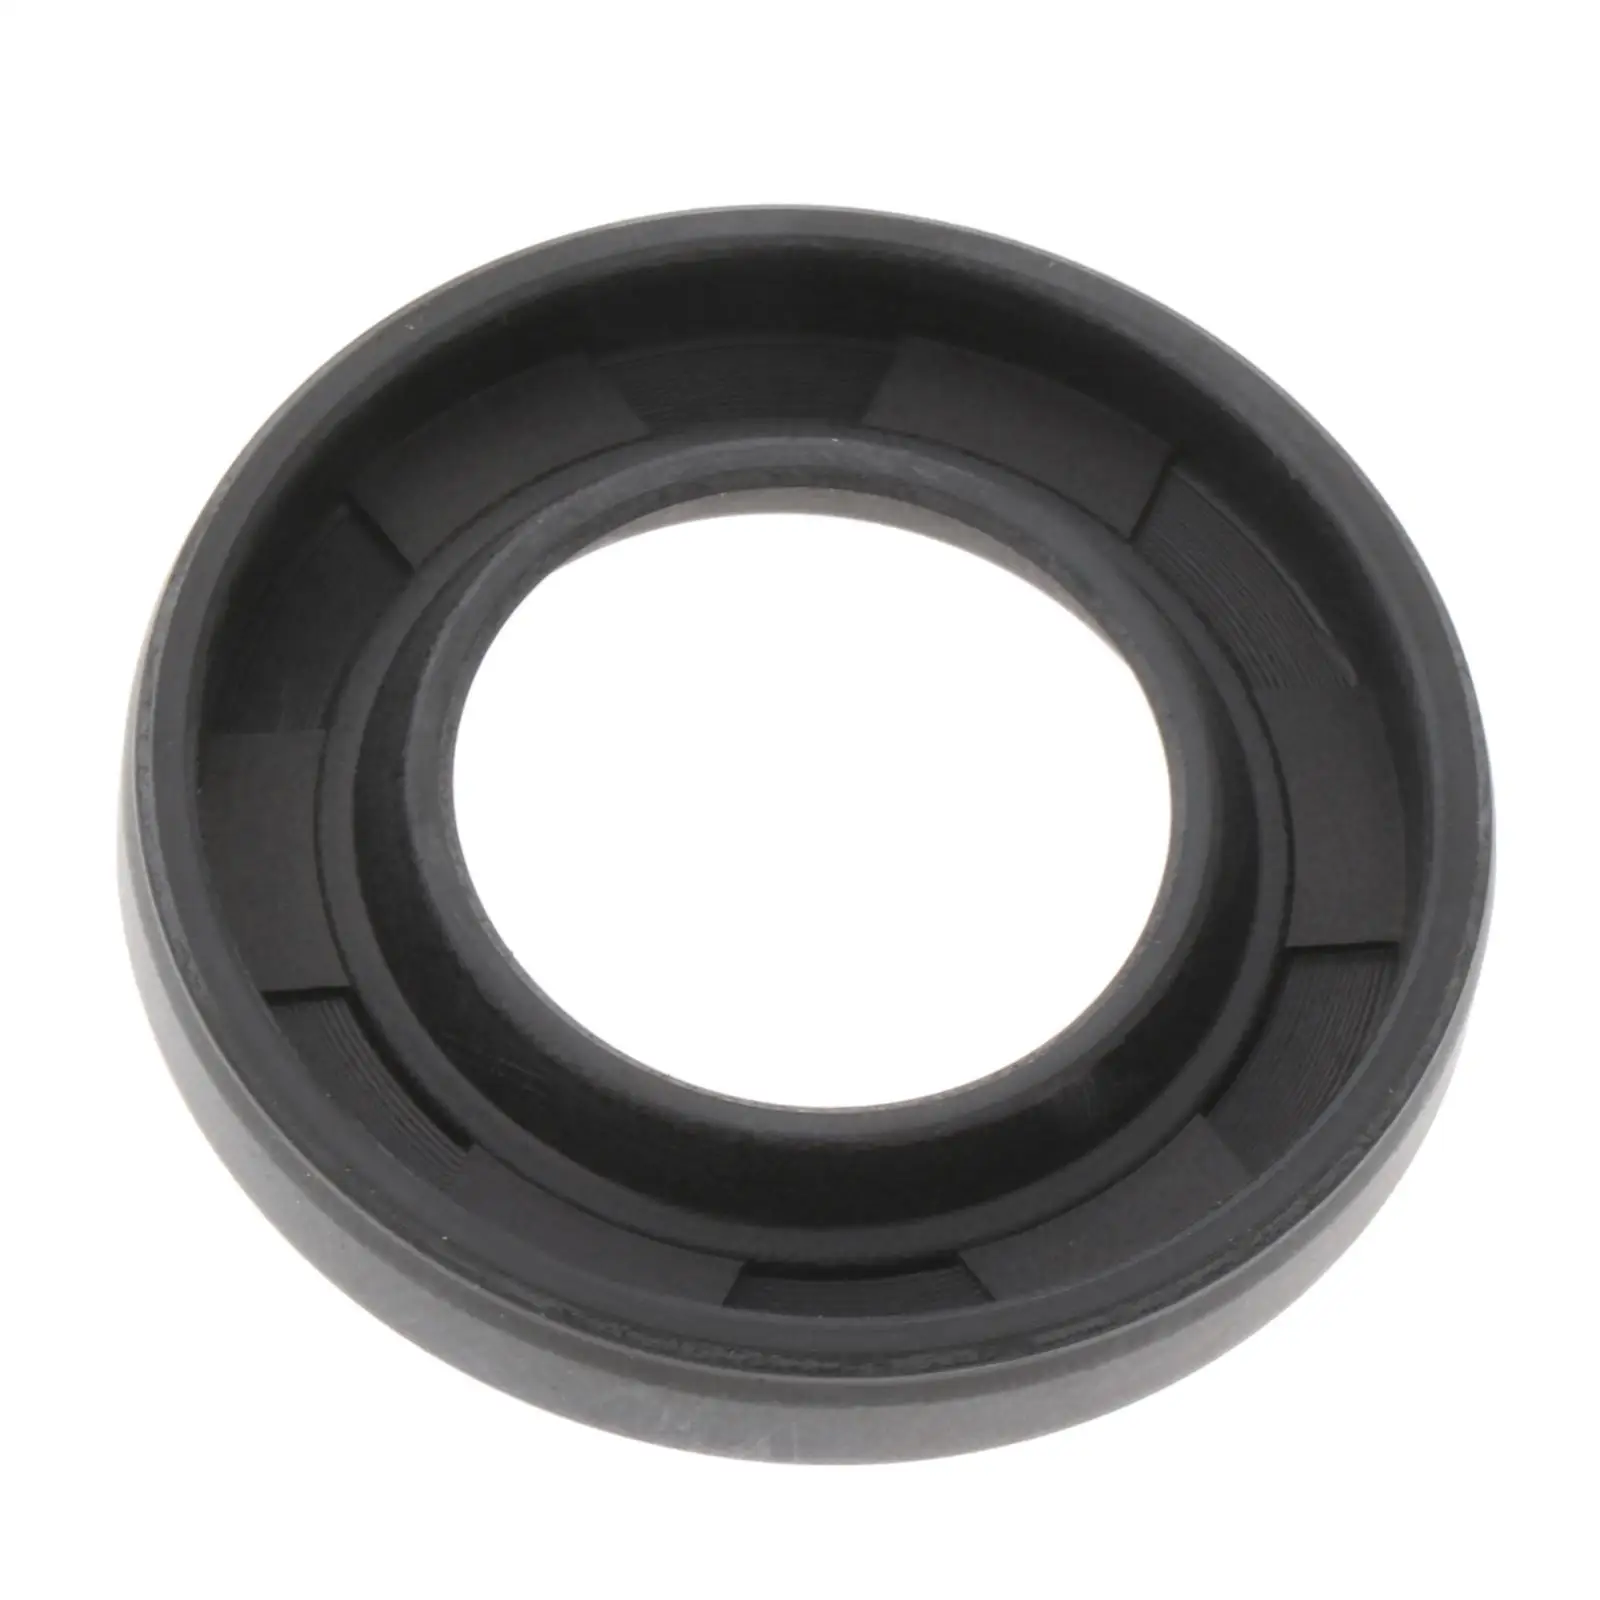 Marine Oil Seal Direct Replaces Fit for Outboard Motor 60HP 70HP